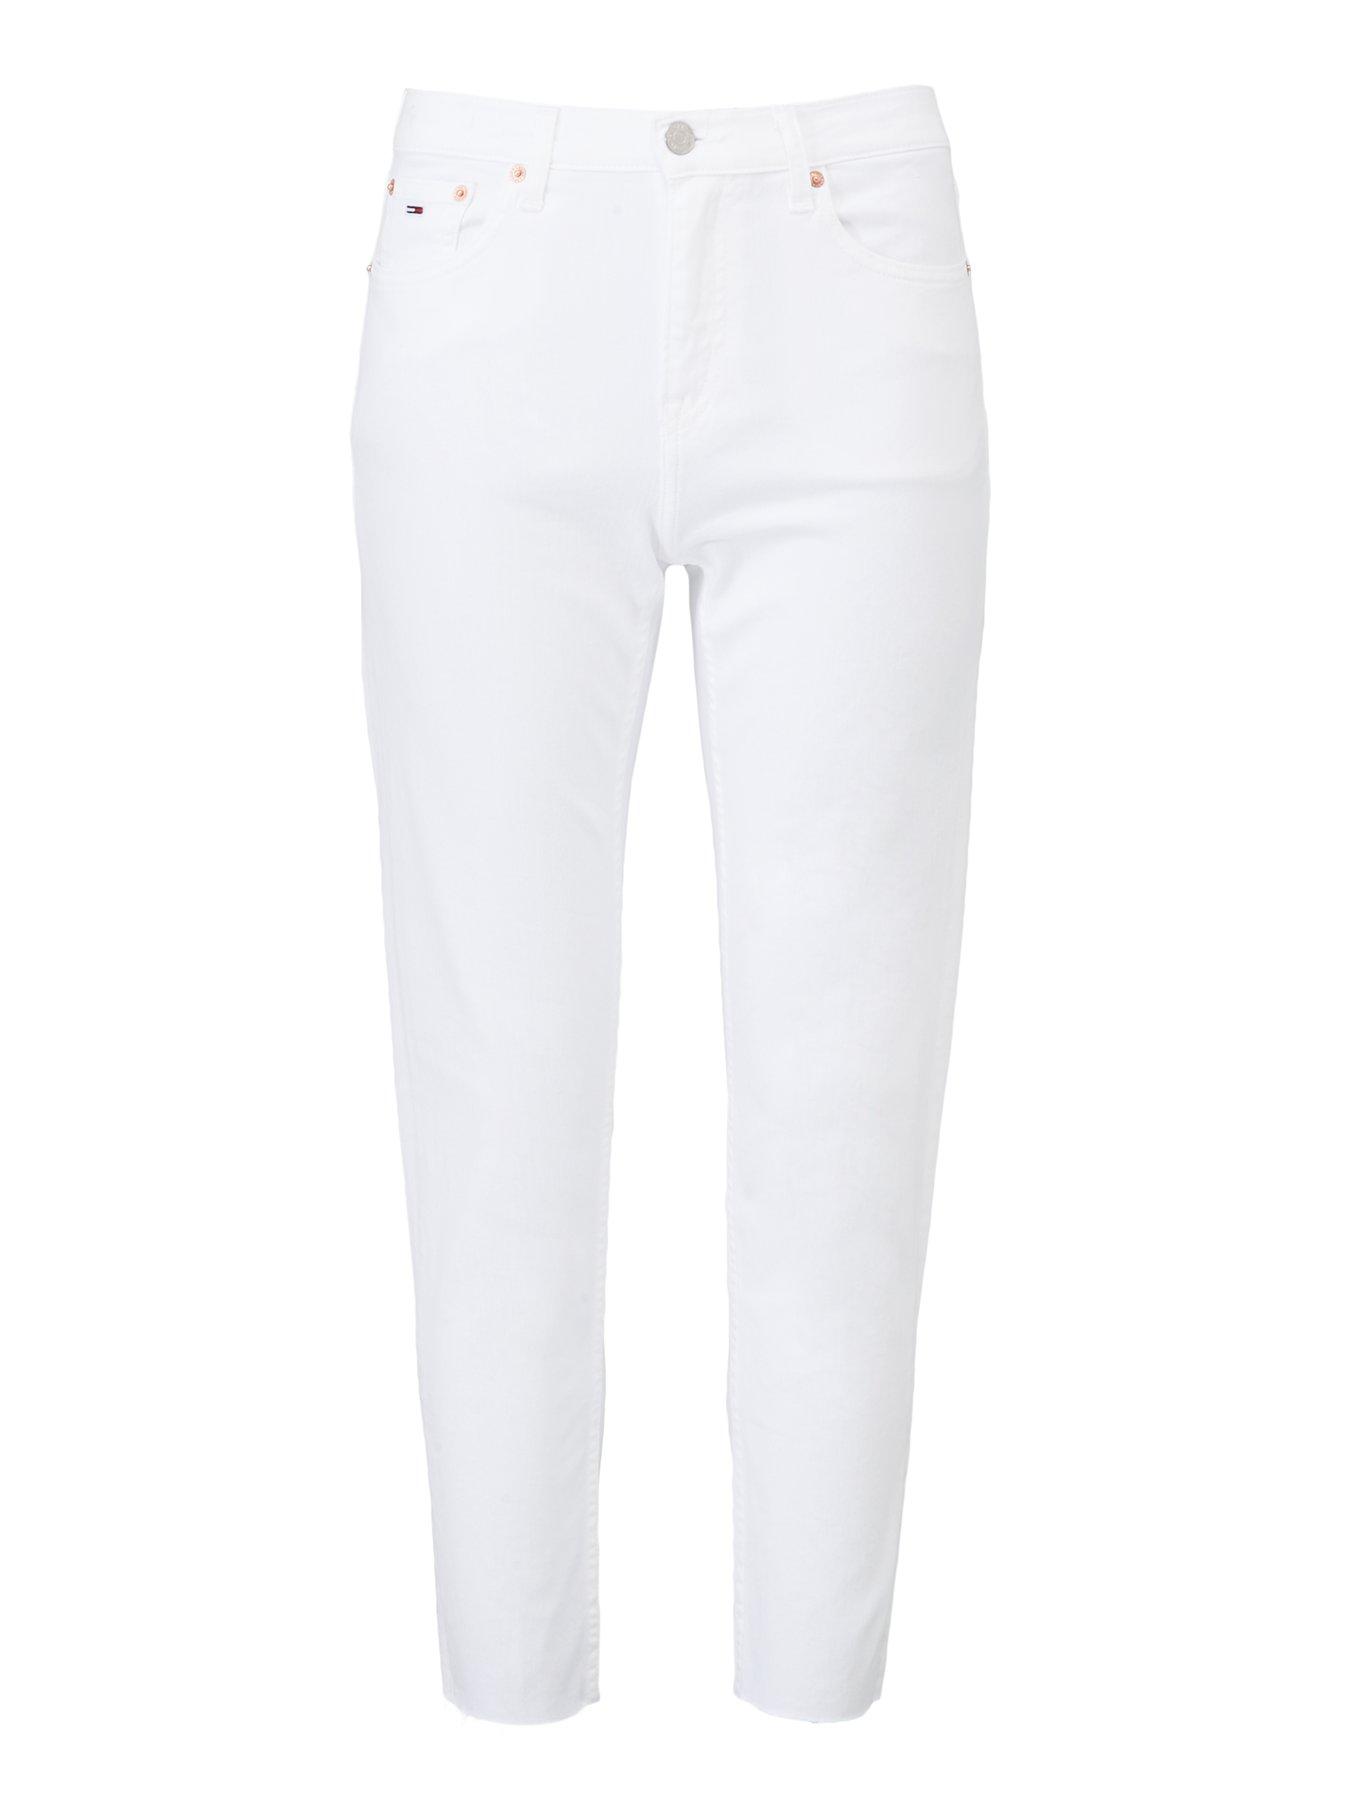 White Jeans | White Jeans for Women 